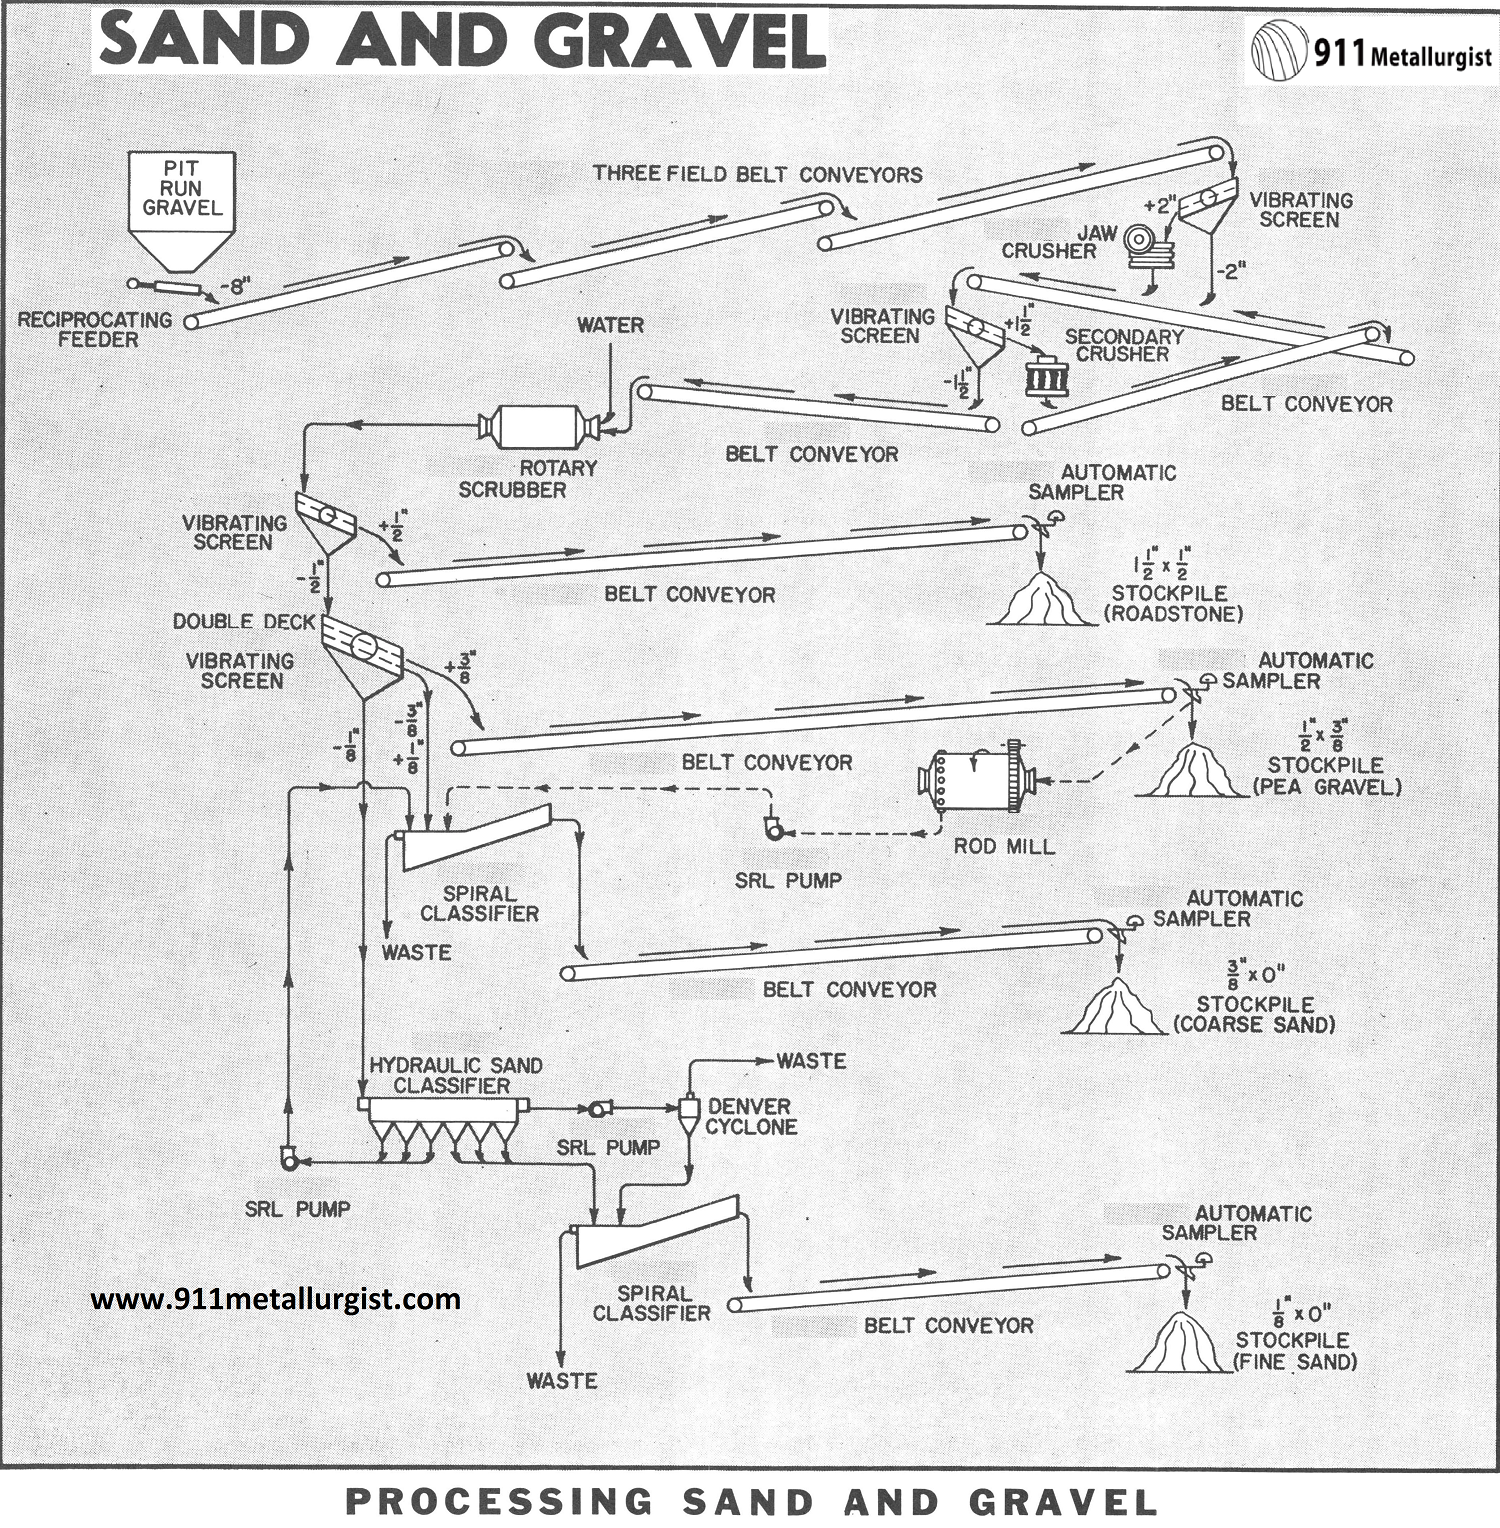 Processing Sand and Gravel